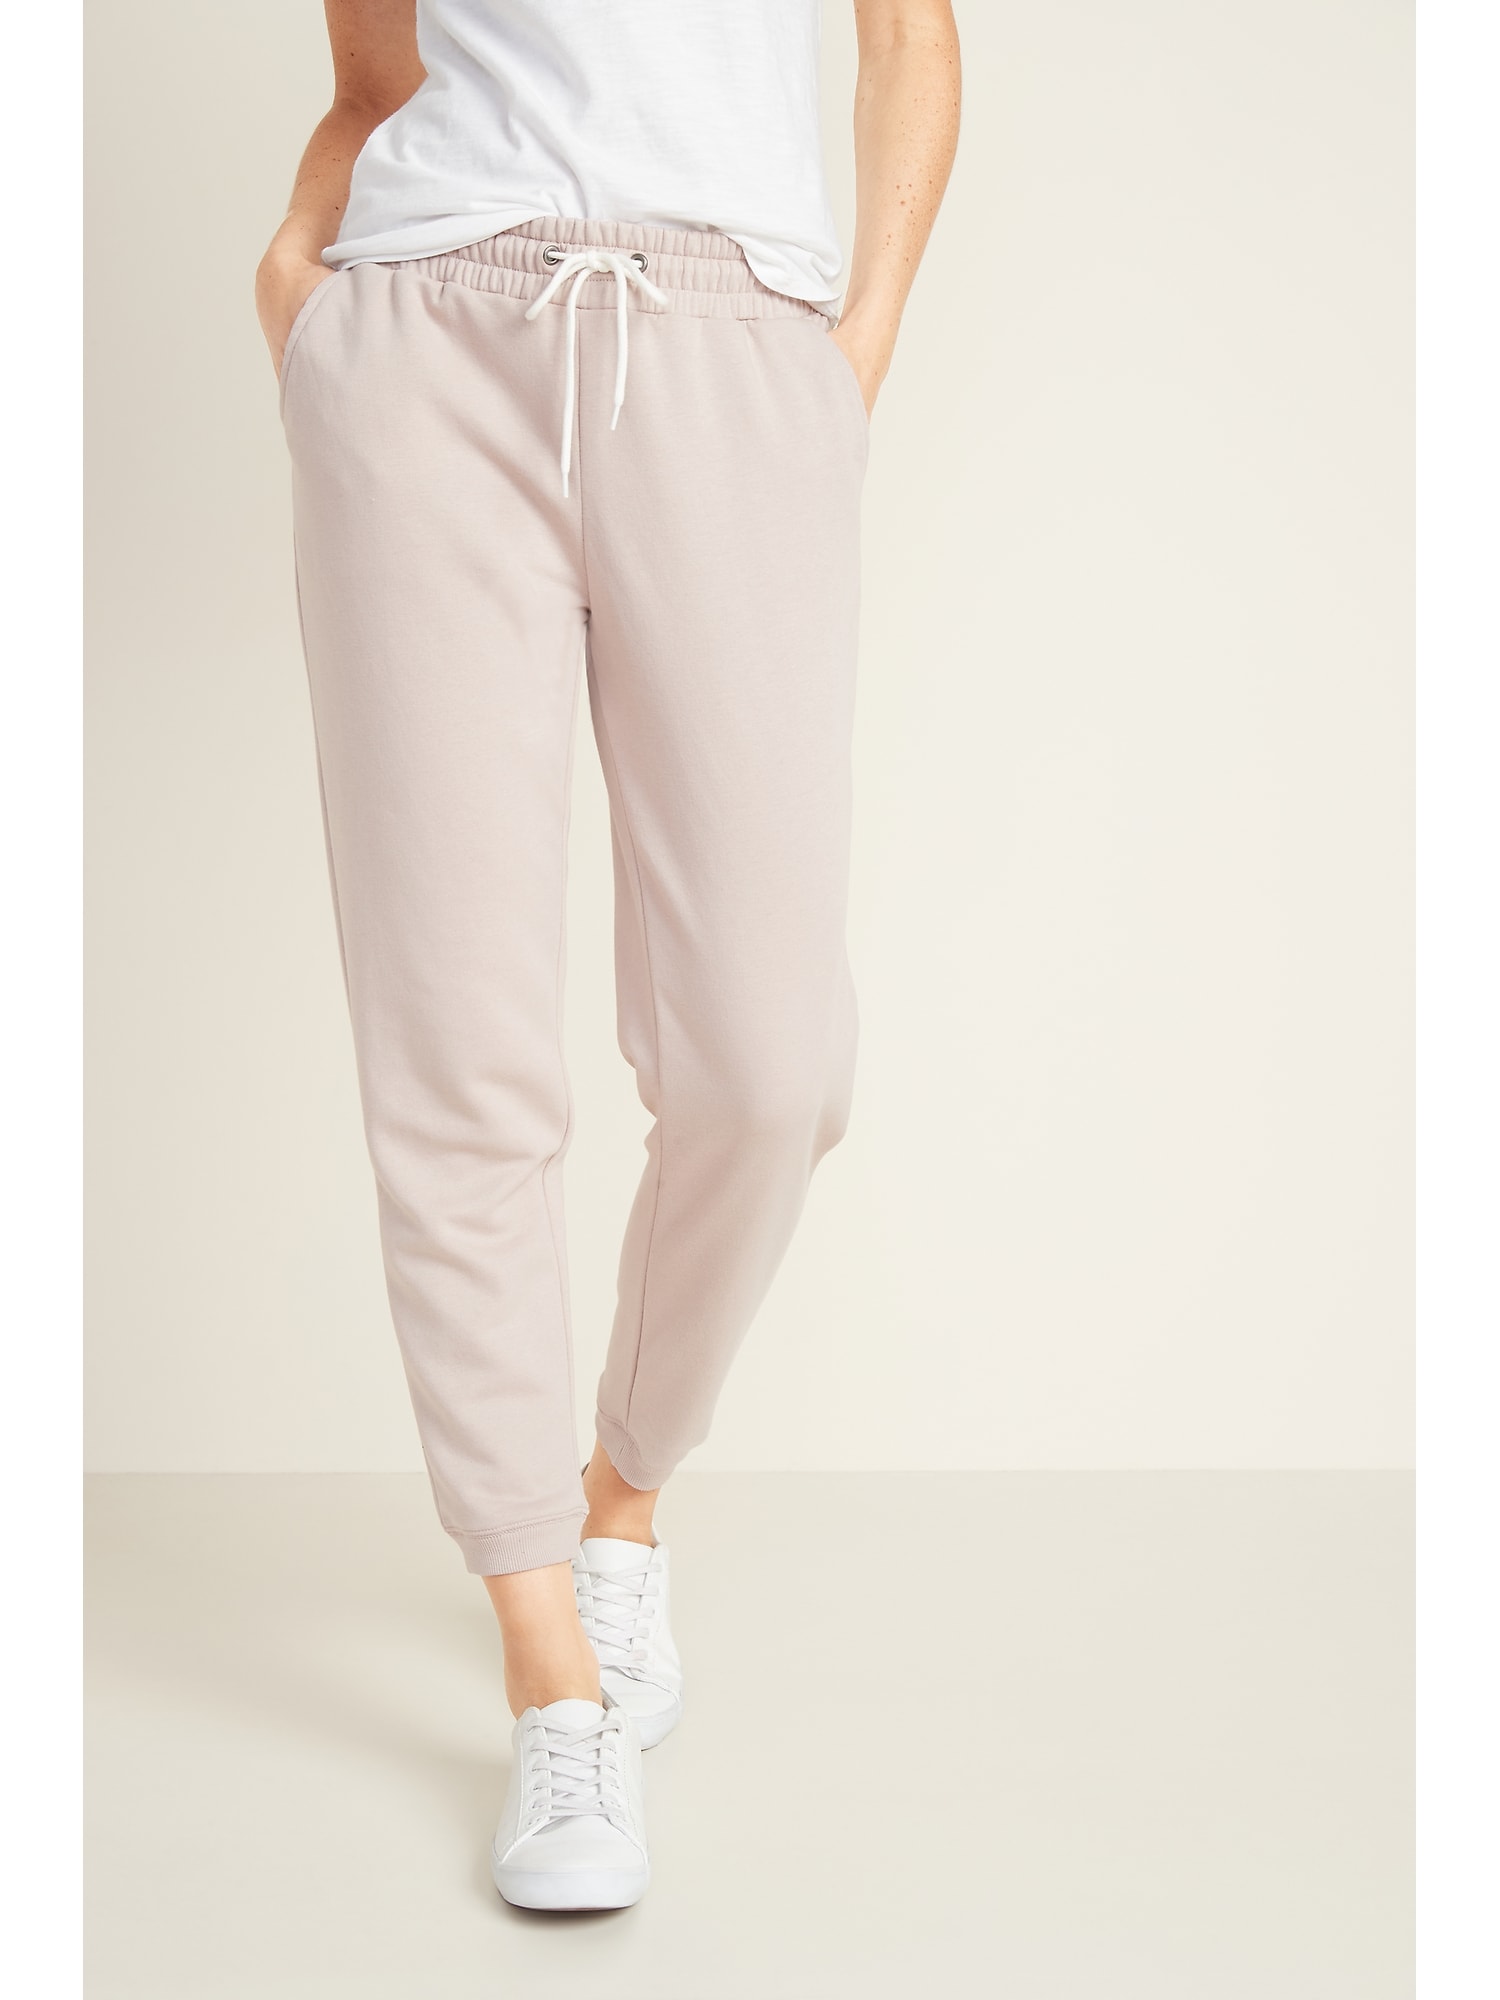 French-Terry Jogger Pants for Women 